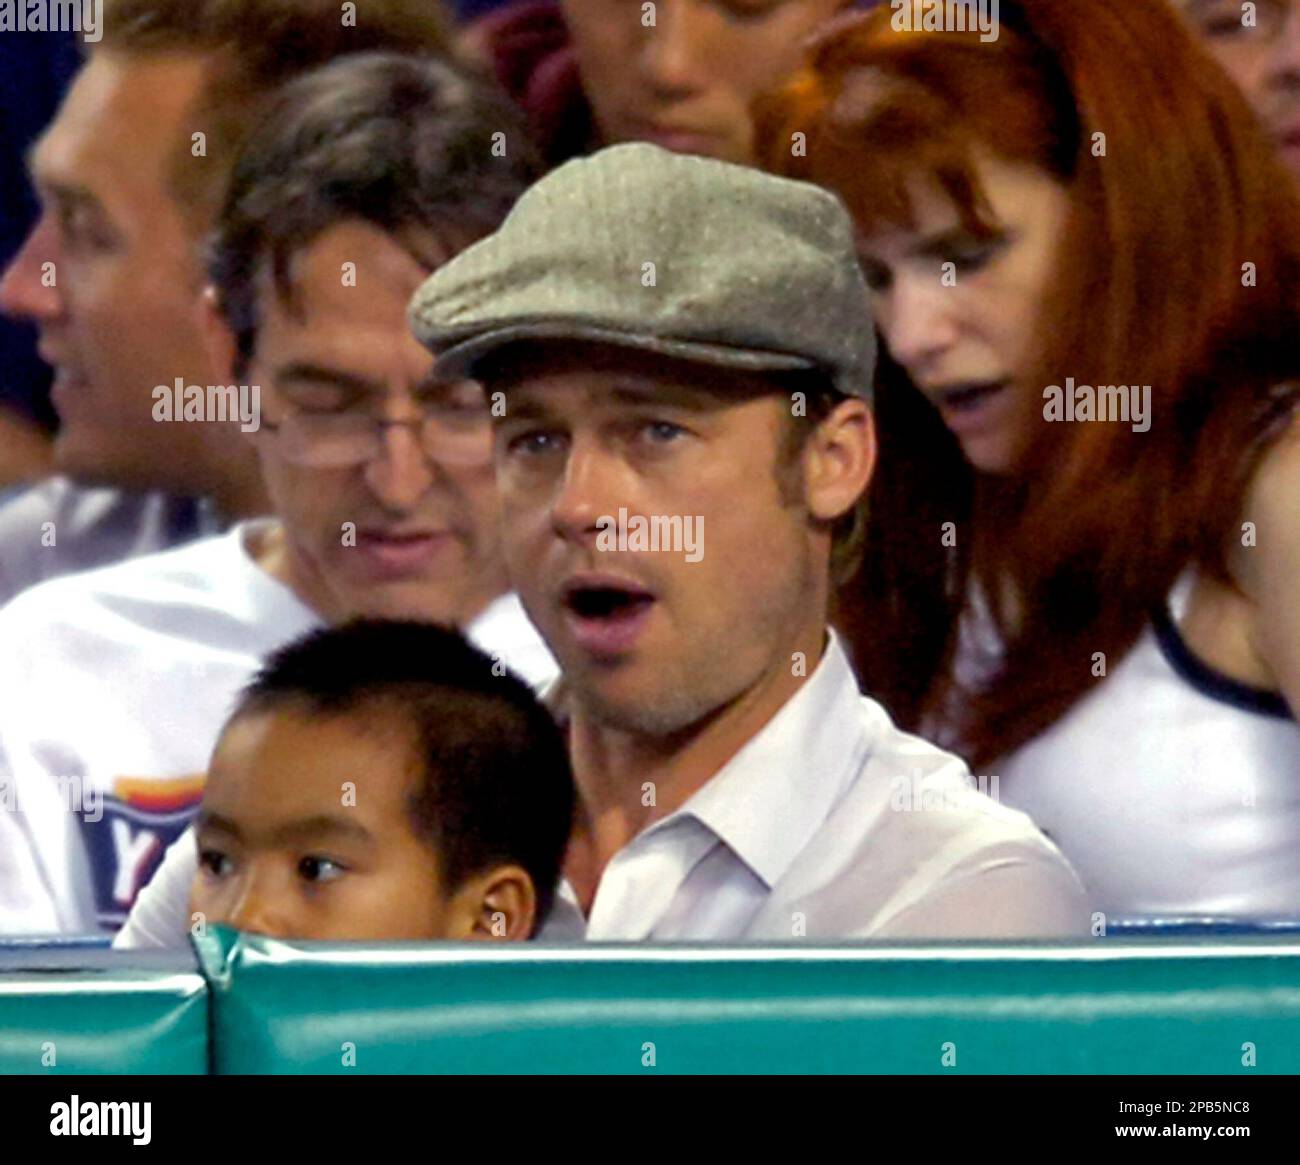 bestemt bekendtskab Træ Actor Brad Pitt with son Maddox on his lap watches the New York Yankees  beat the Seattle Mariners 12-3 during MLB baseball Tuesday night, Sept. 4,  2007 at Yankee Stadium in New